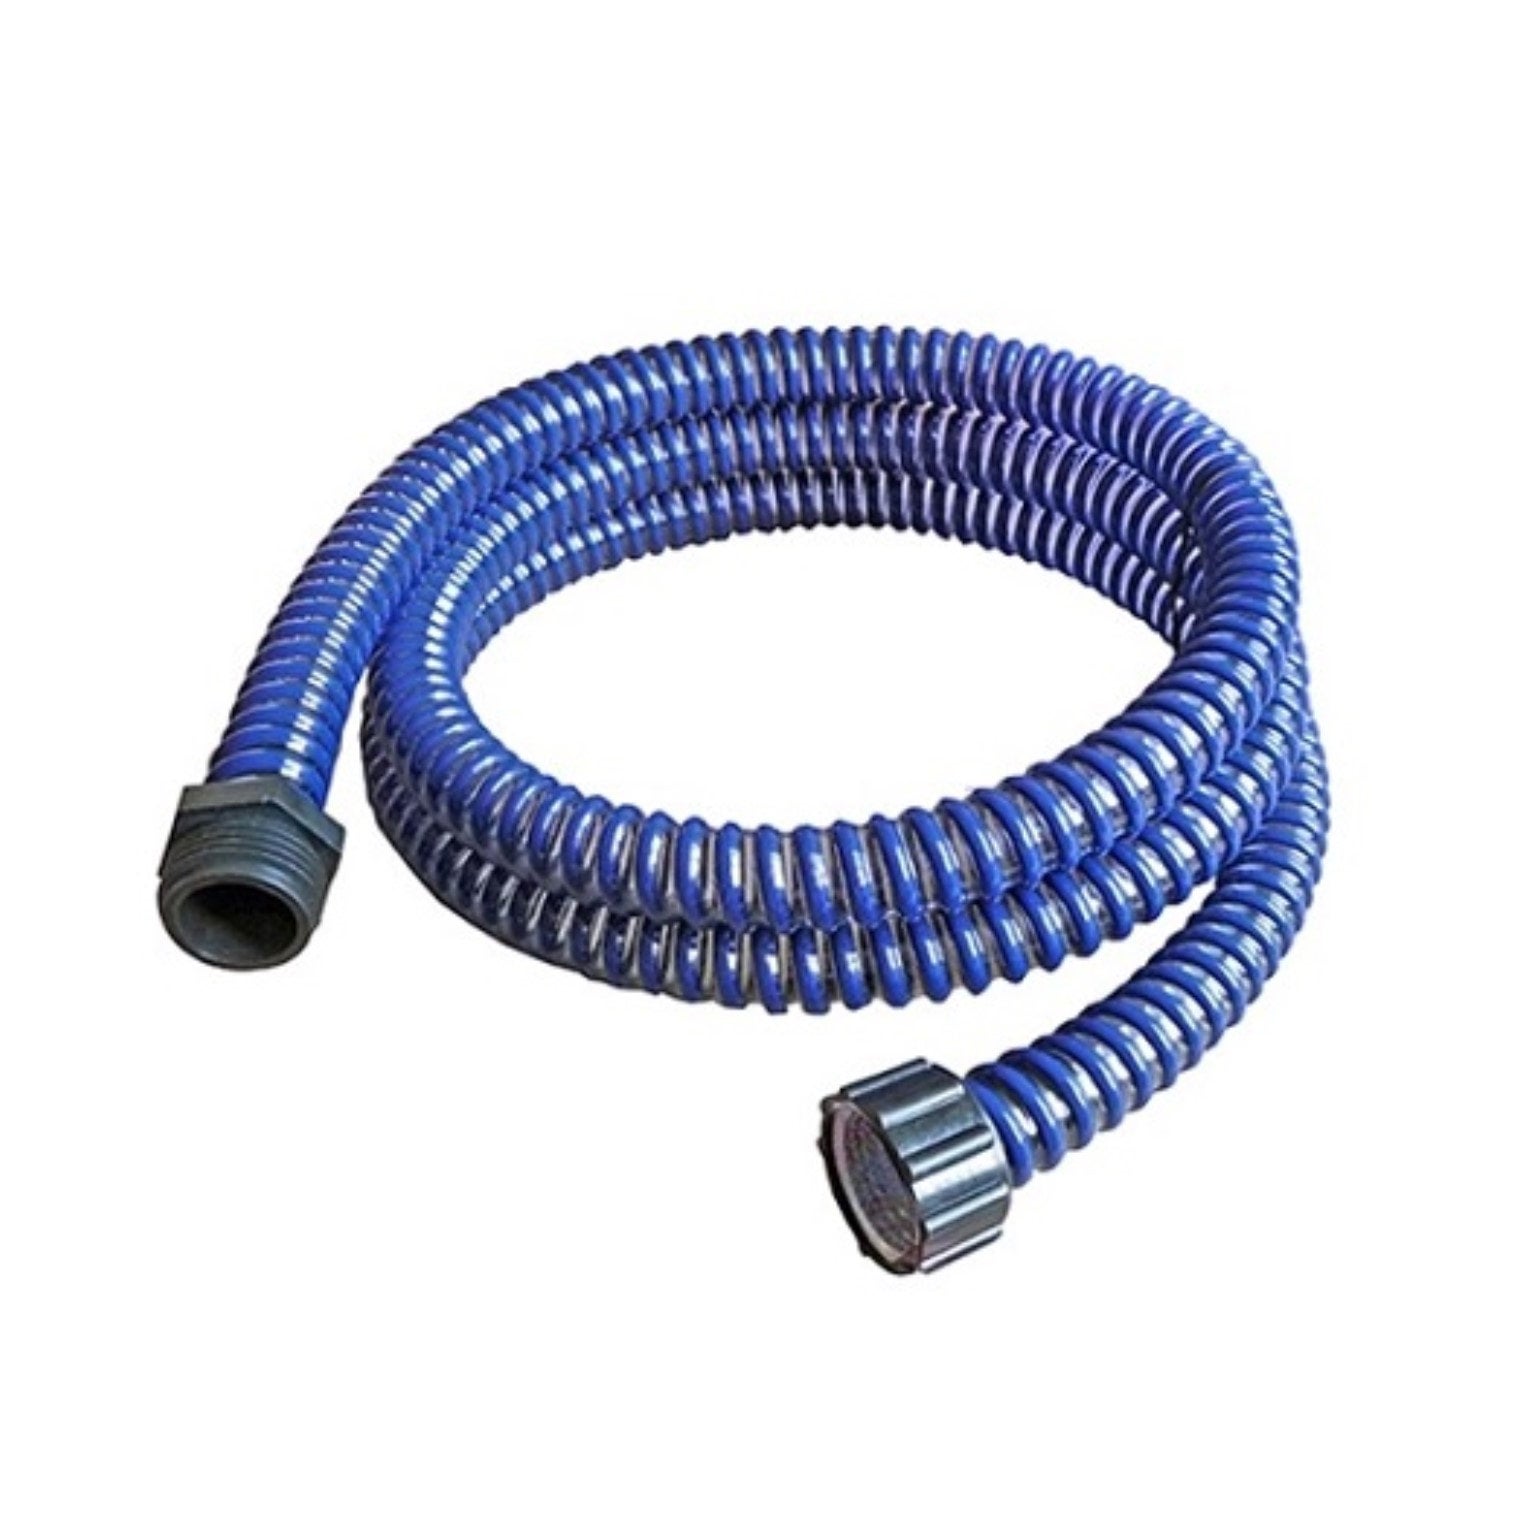 Tool Daily Pressure Washer Whip Hose with Swivel, Brazil